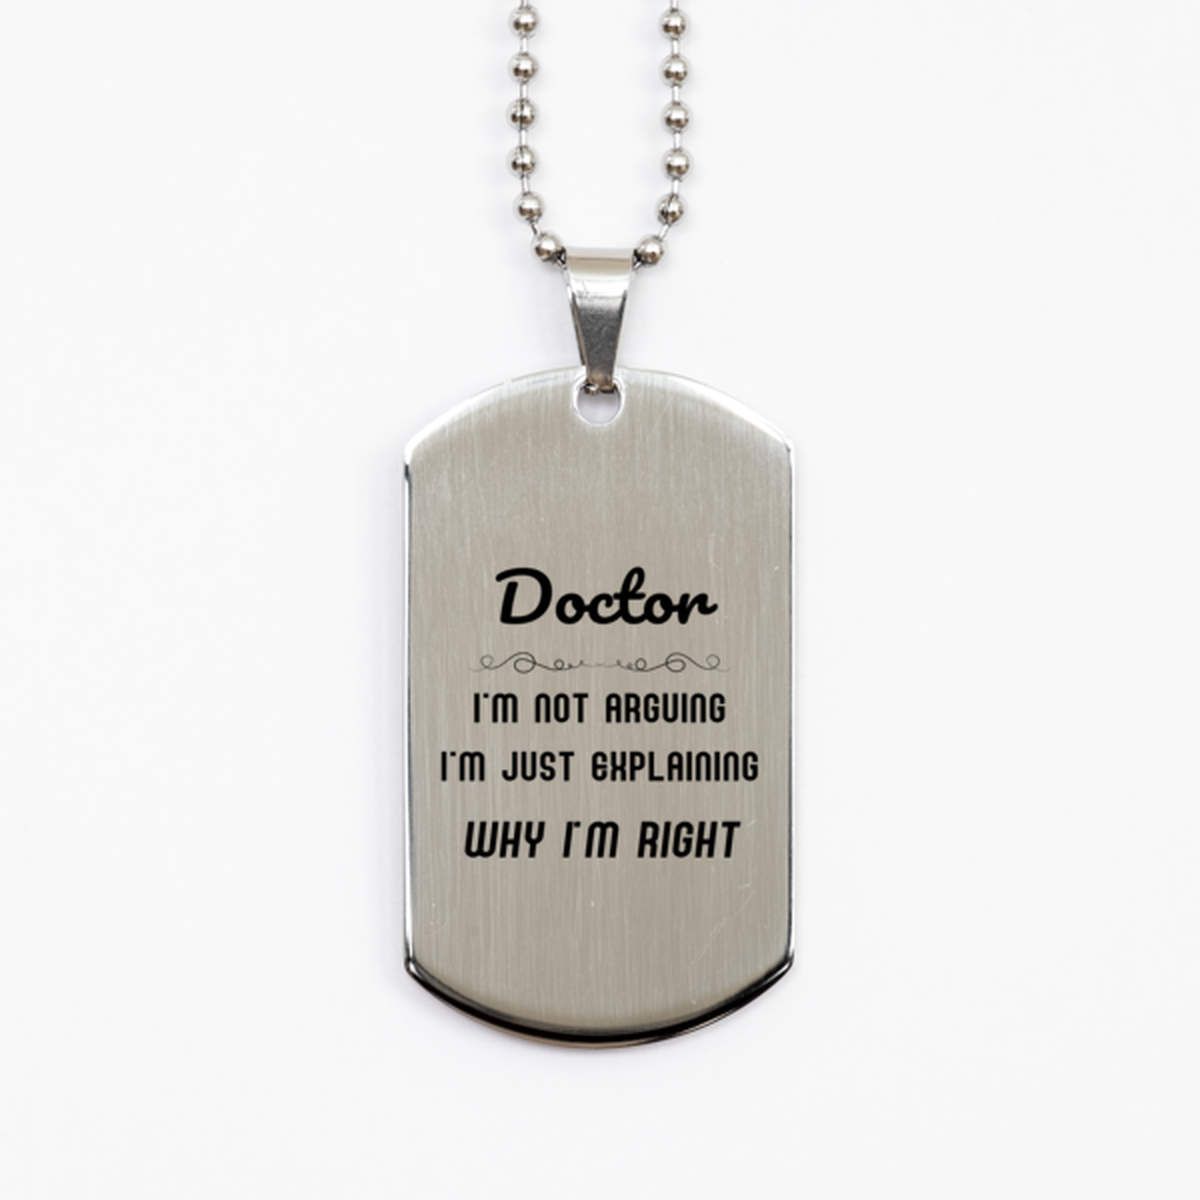 Doctor I'm not Arguing. I'm Just Explaining Why I'm RIGHT Silver Dog Tag, Funny Saying Quote Doctor Gifts For Doctor Graduation Birthday Christmas Gifts for Men Women Coworker